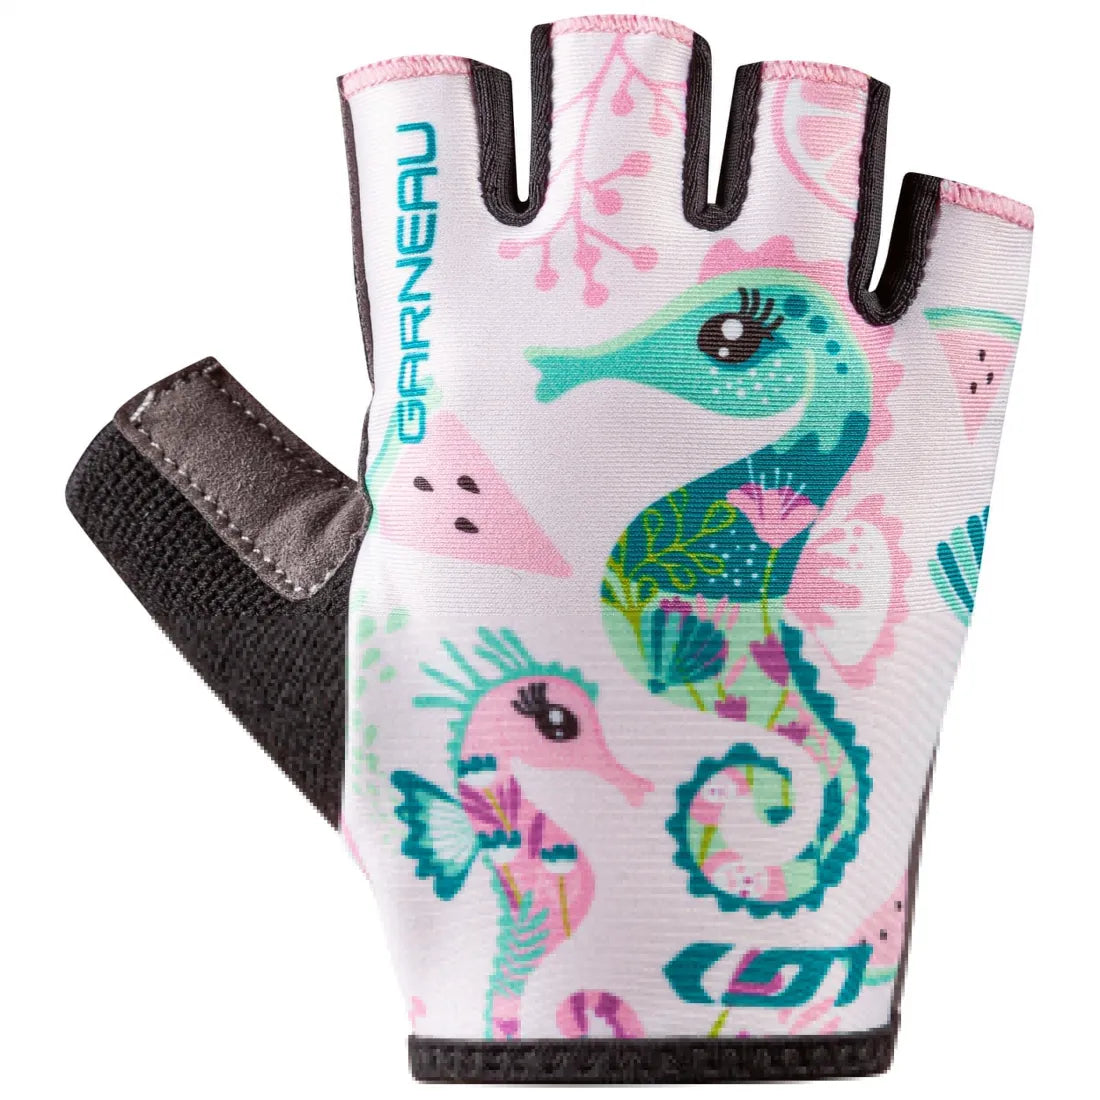 KID CYCLING GLOVES